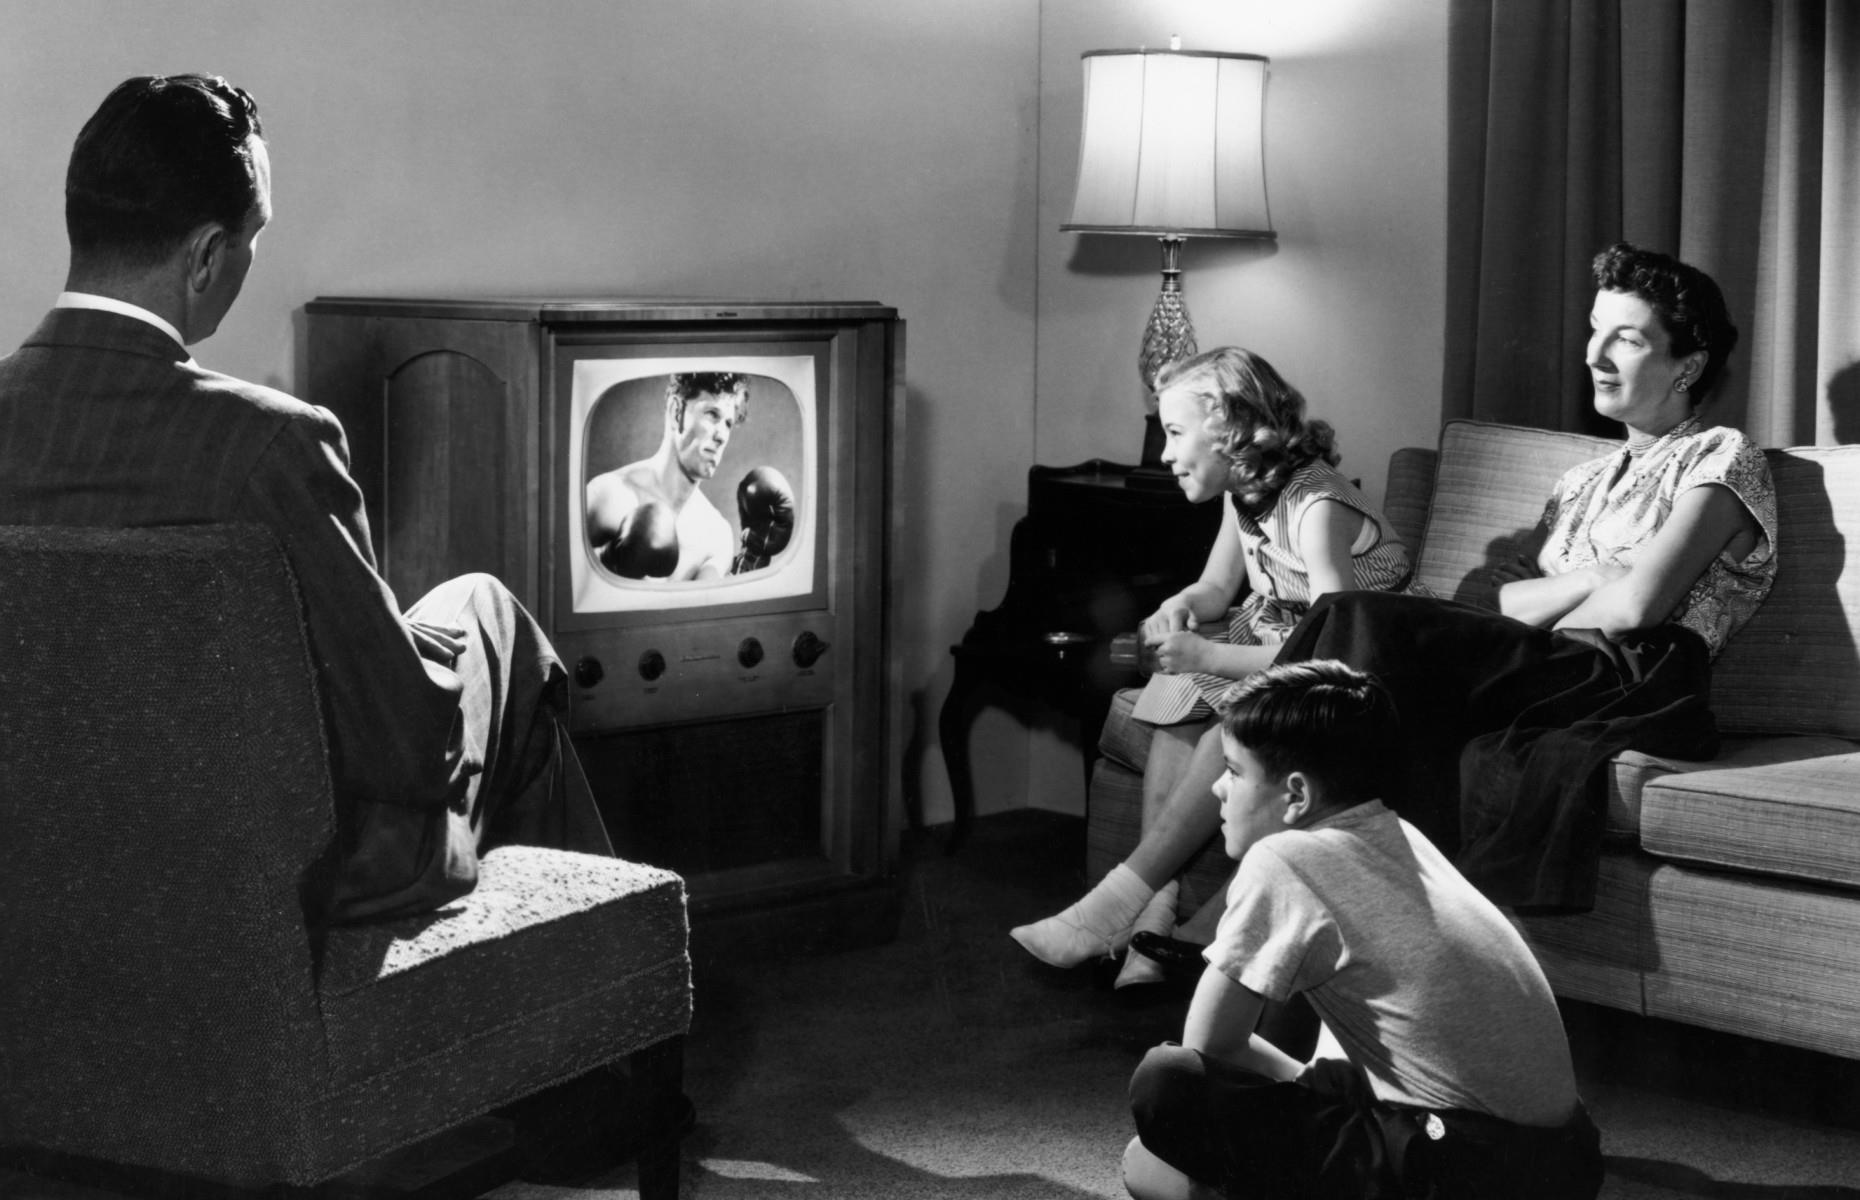 TVs: became widely affordable in the 1950s